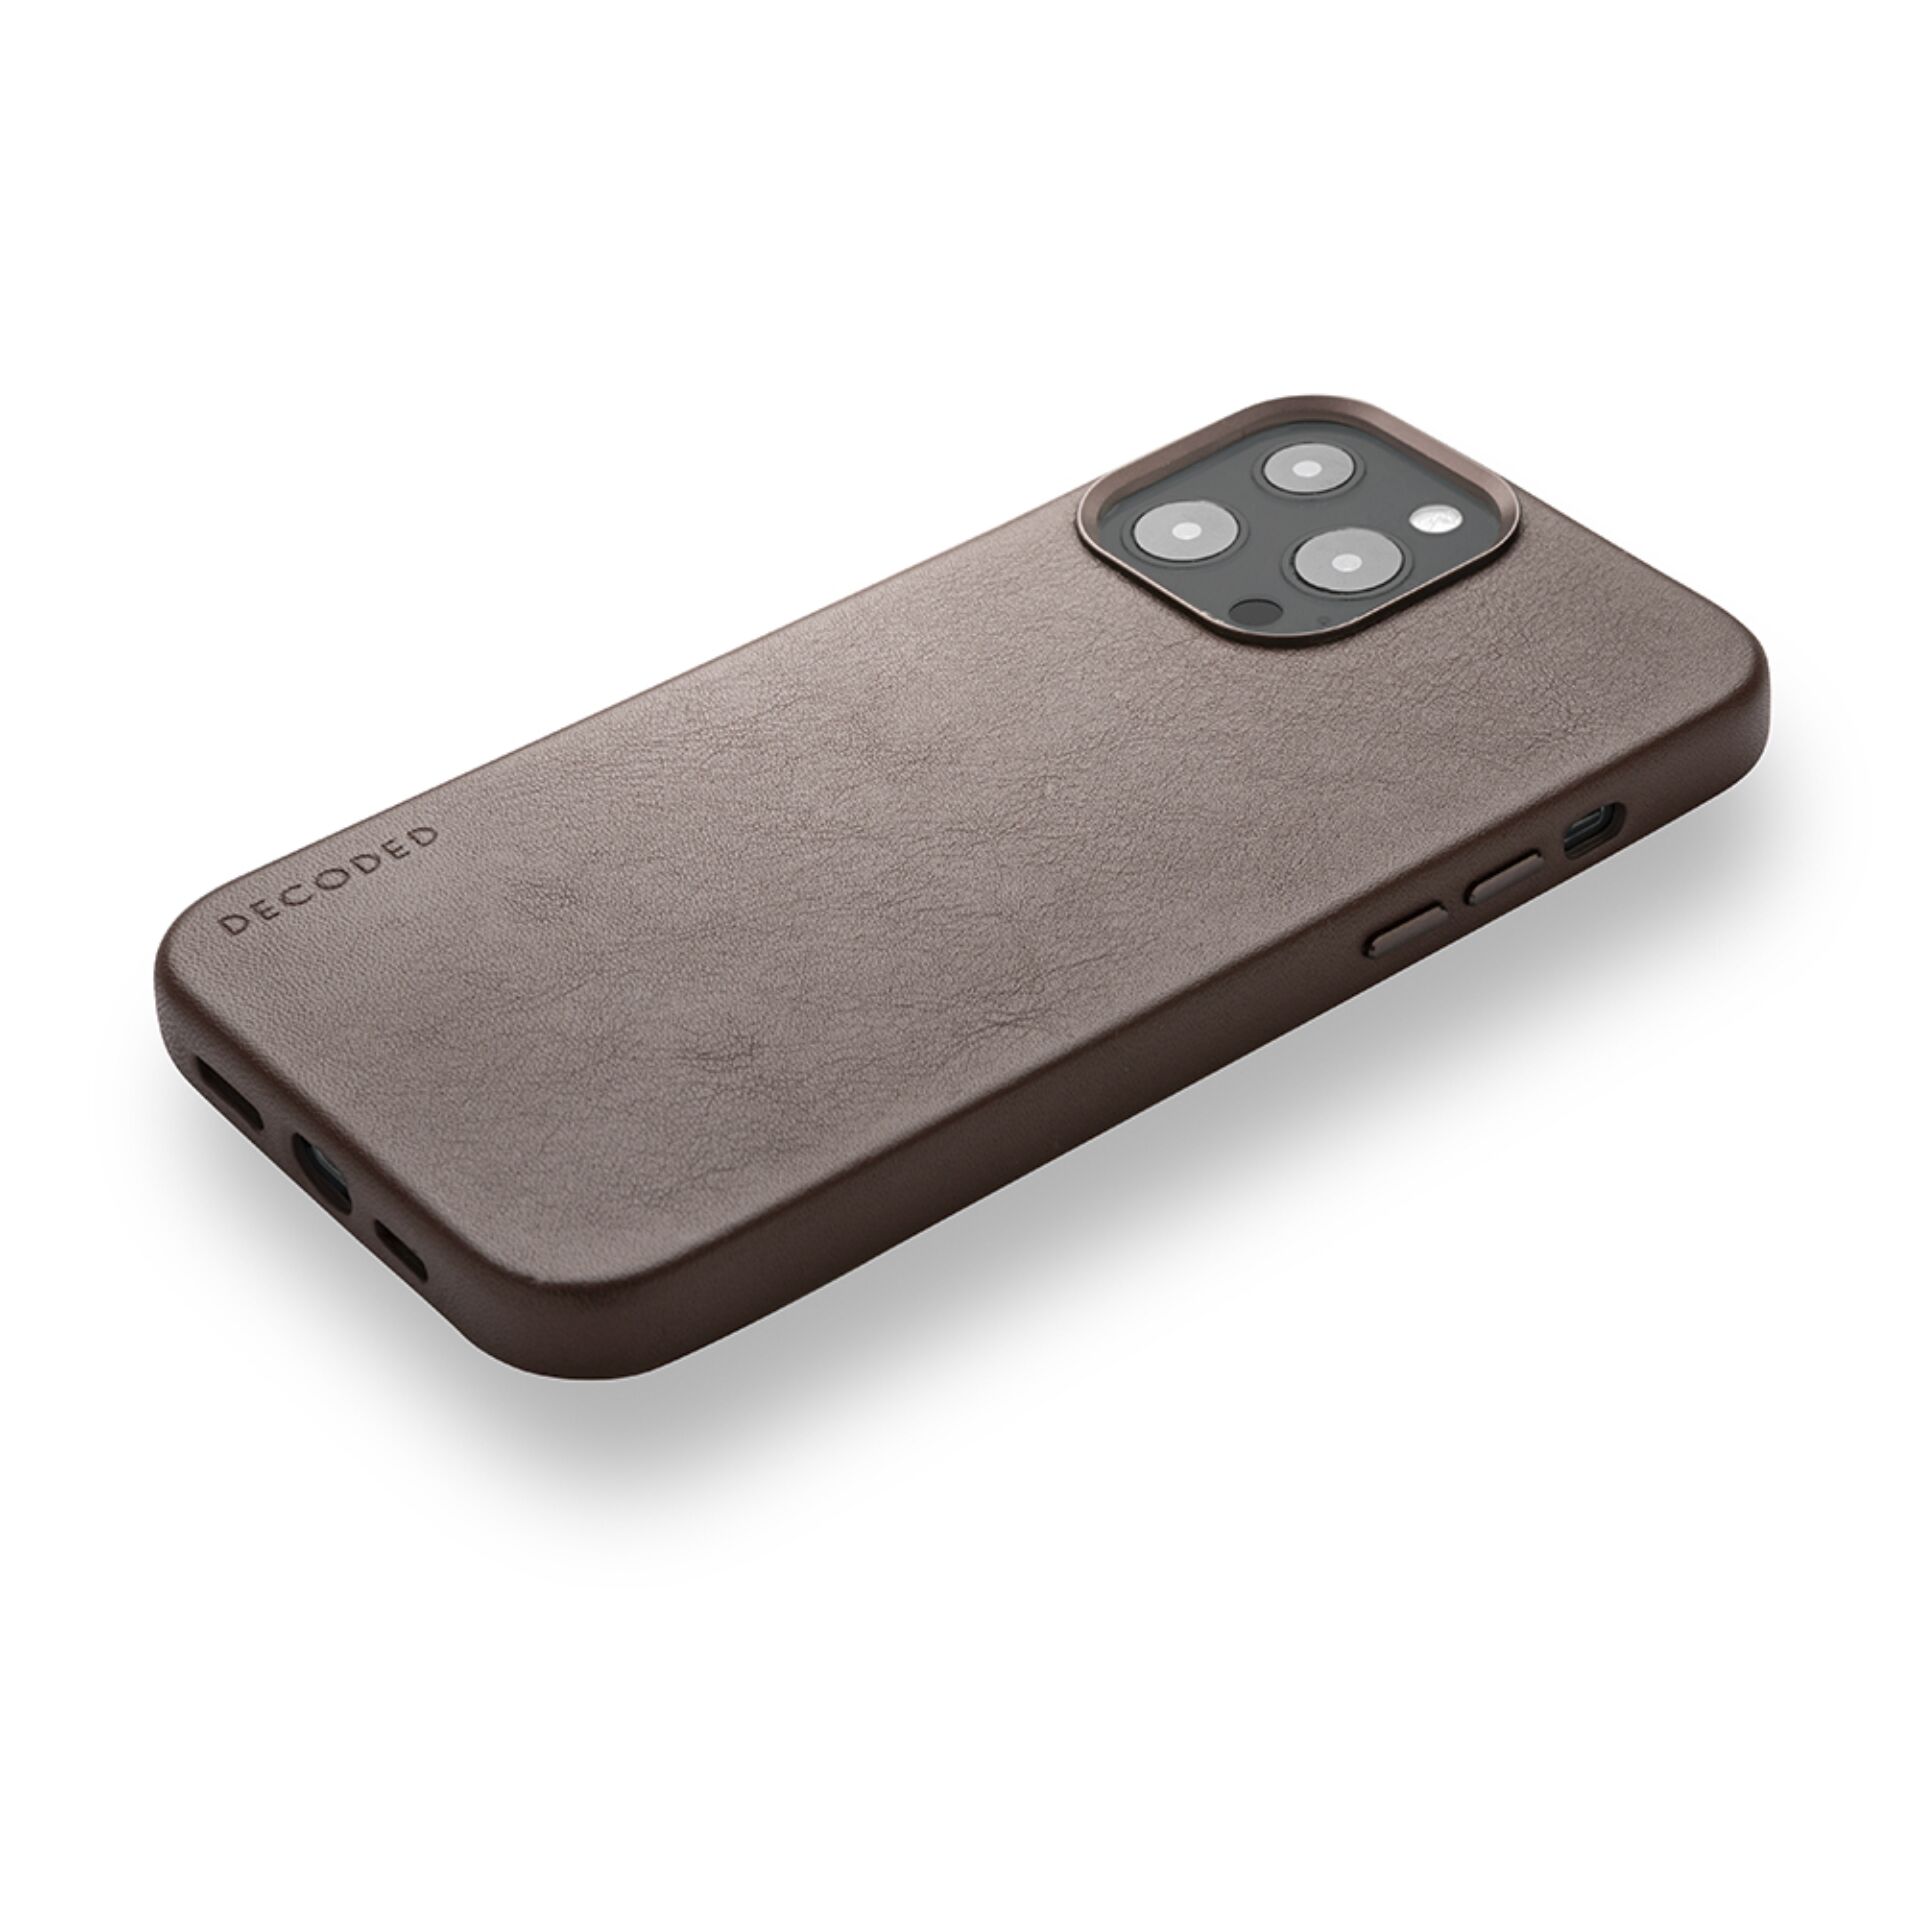 Decoded Leather Wallet for iPhone 12 Pro Max - Brown